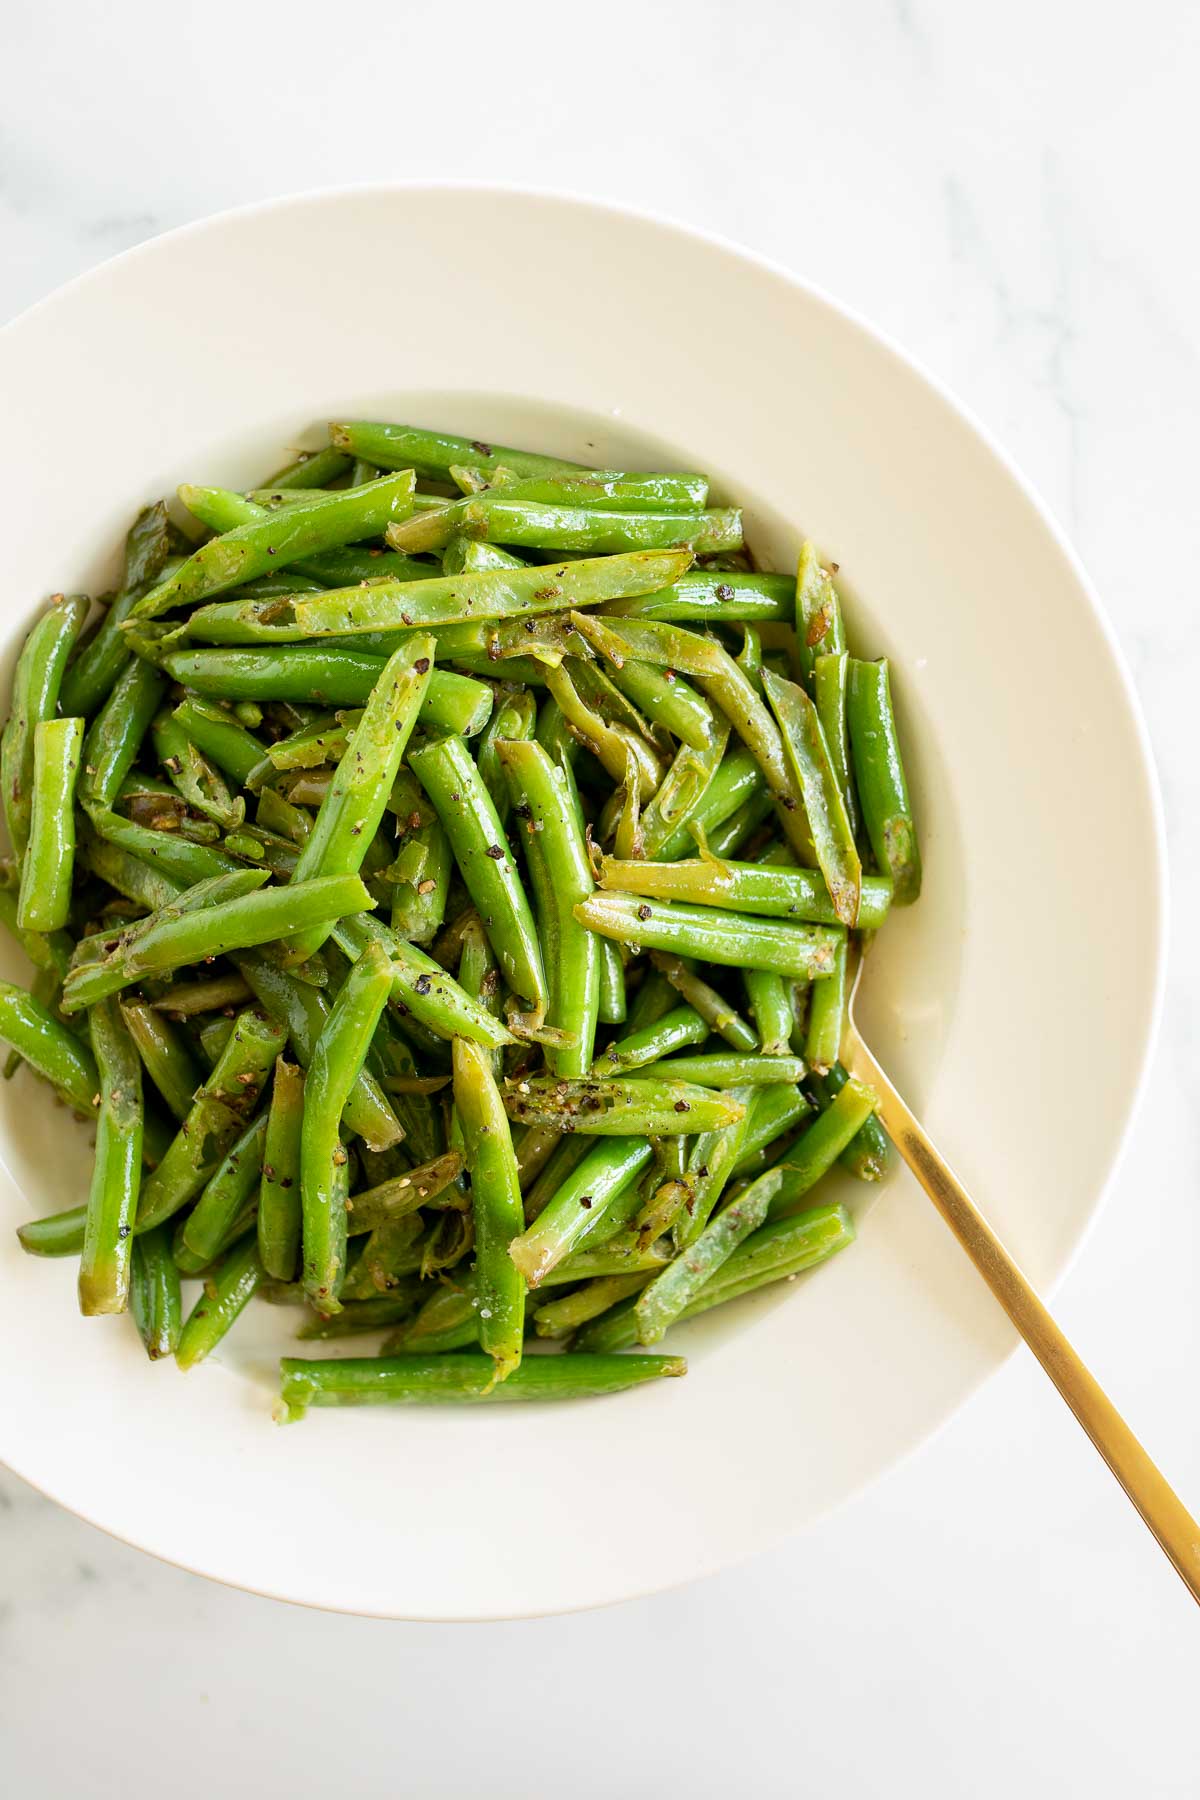 Seasoned green beans in a white bowl with a gold spoon.